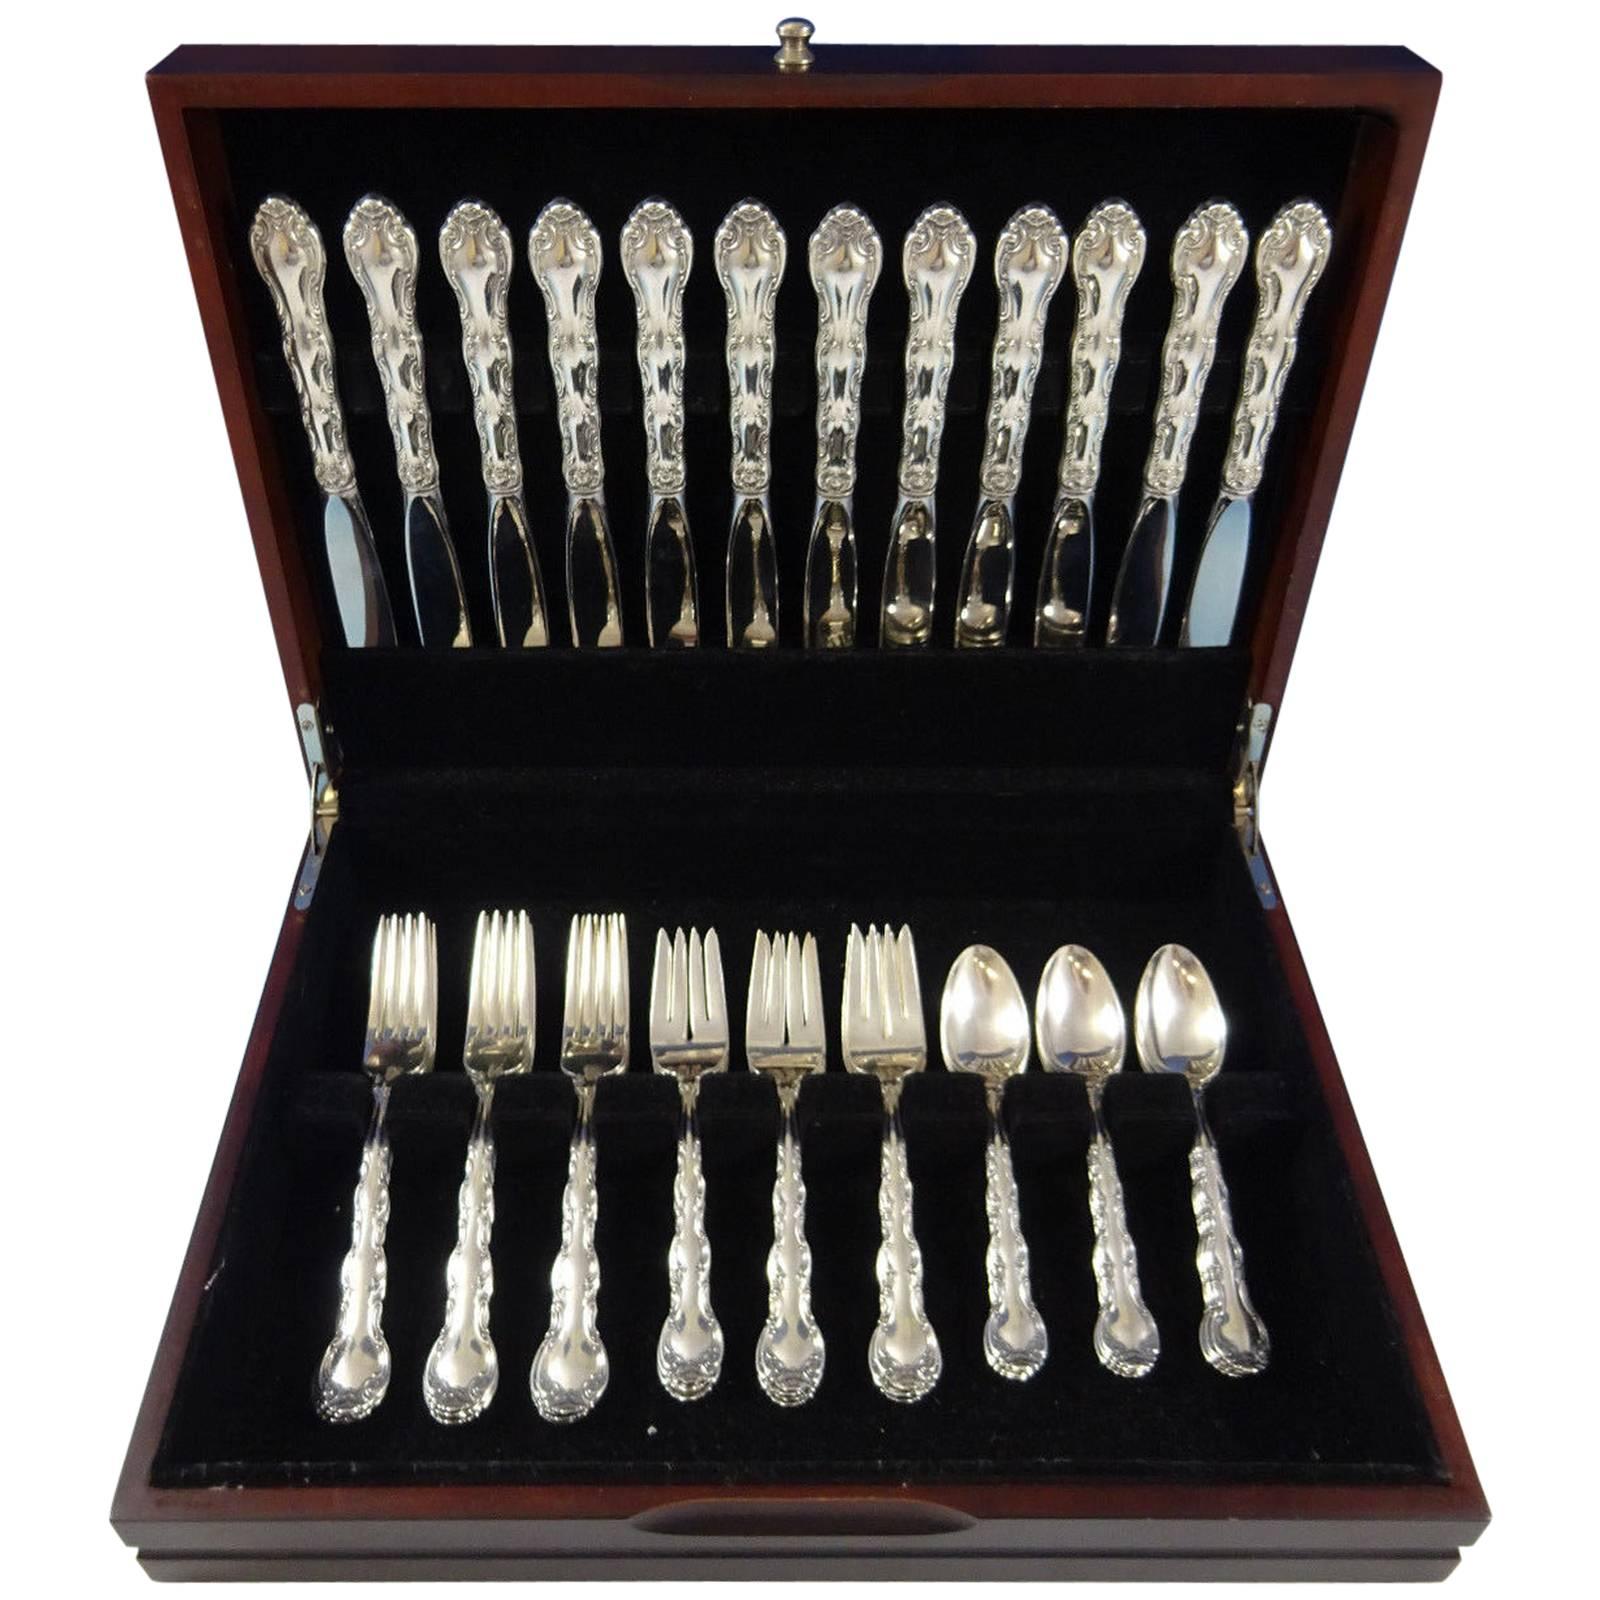 Beautiful French Scroll by Alvin c1953 sterling silver Flatware set of 48 Pieces. This set includes:

12 knives, 8 7/8